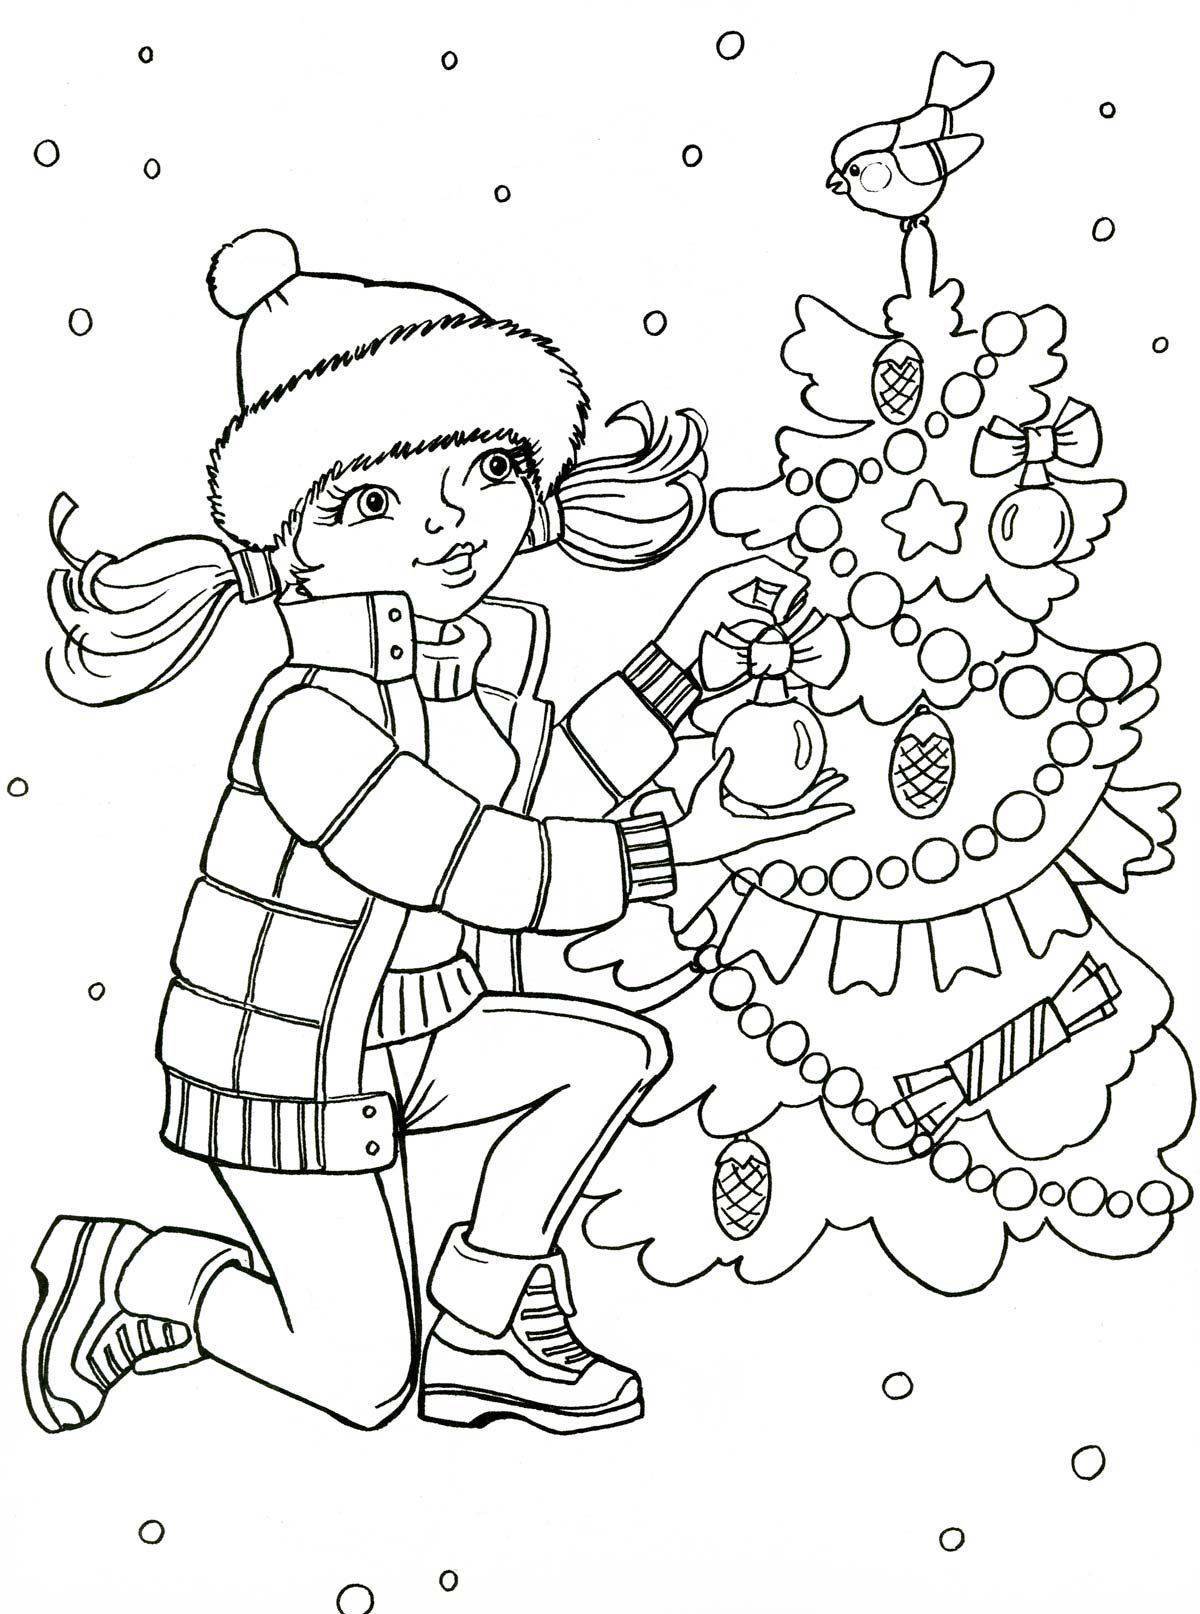 Joyful coloring winter for children 10 years old